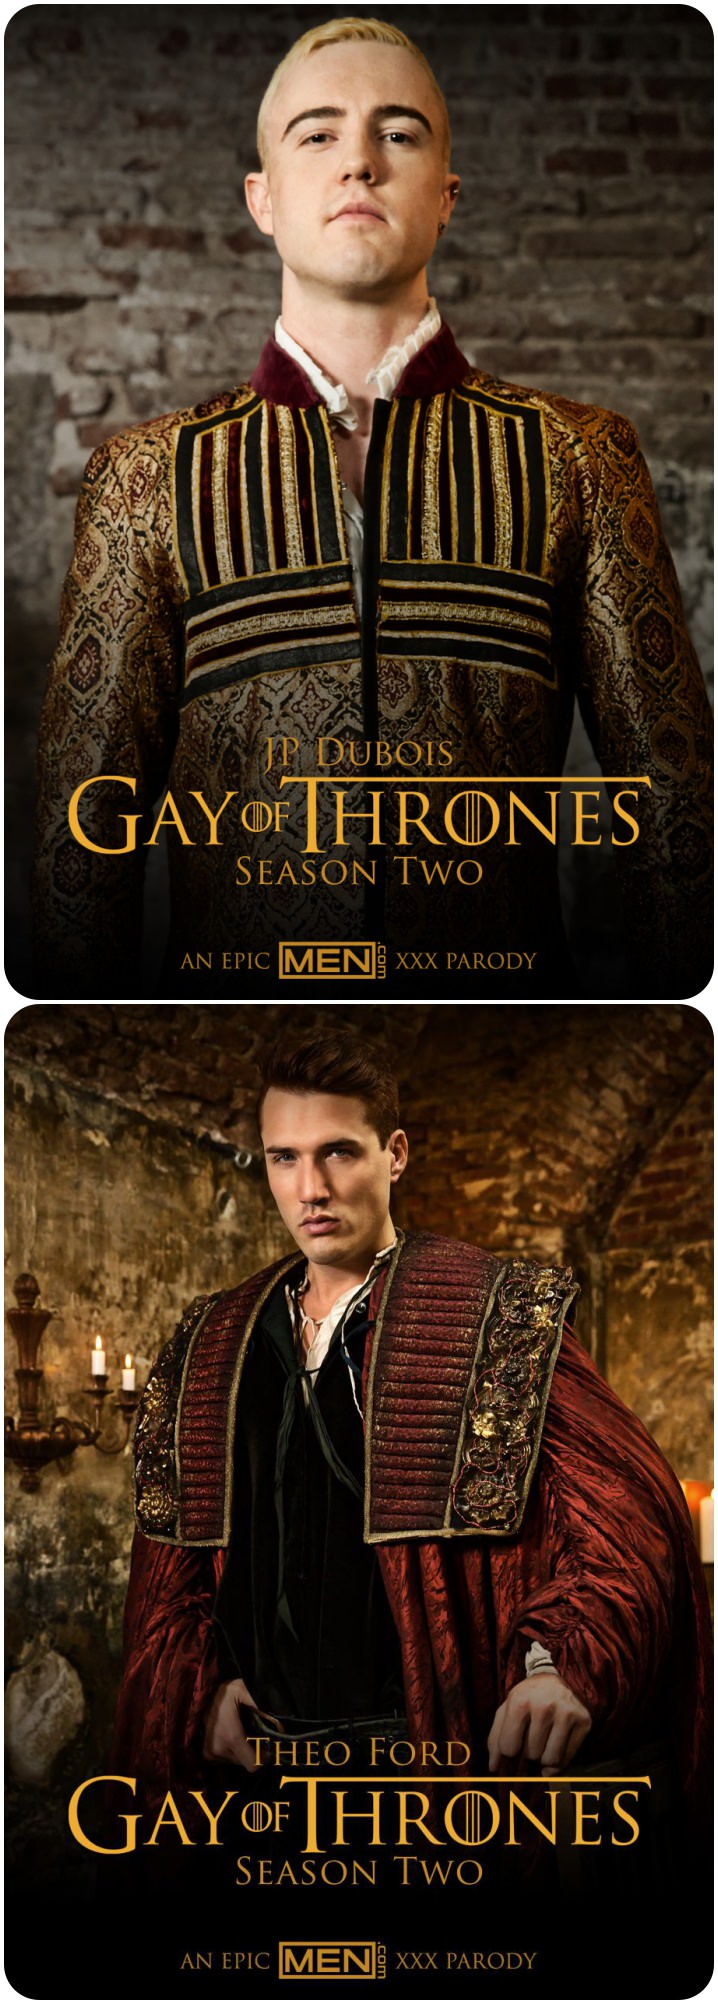 gay-of-thrones-jp-dubois-theo-ford